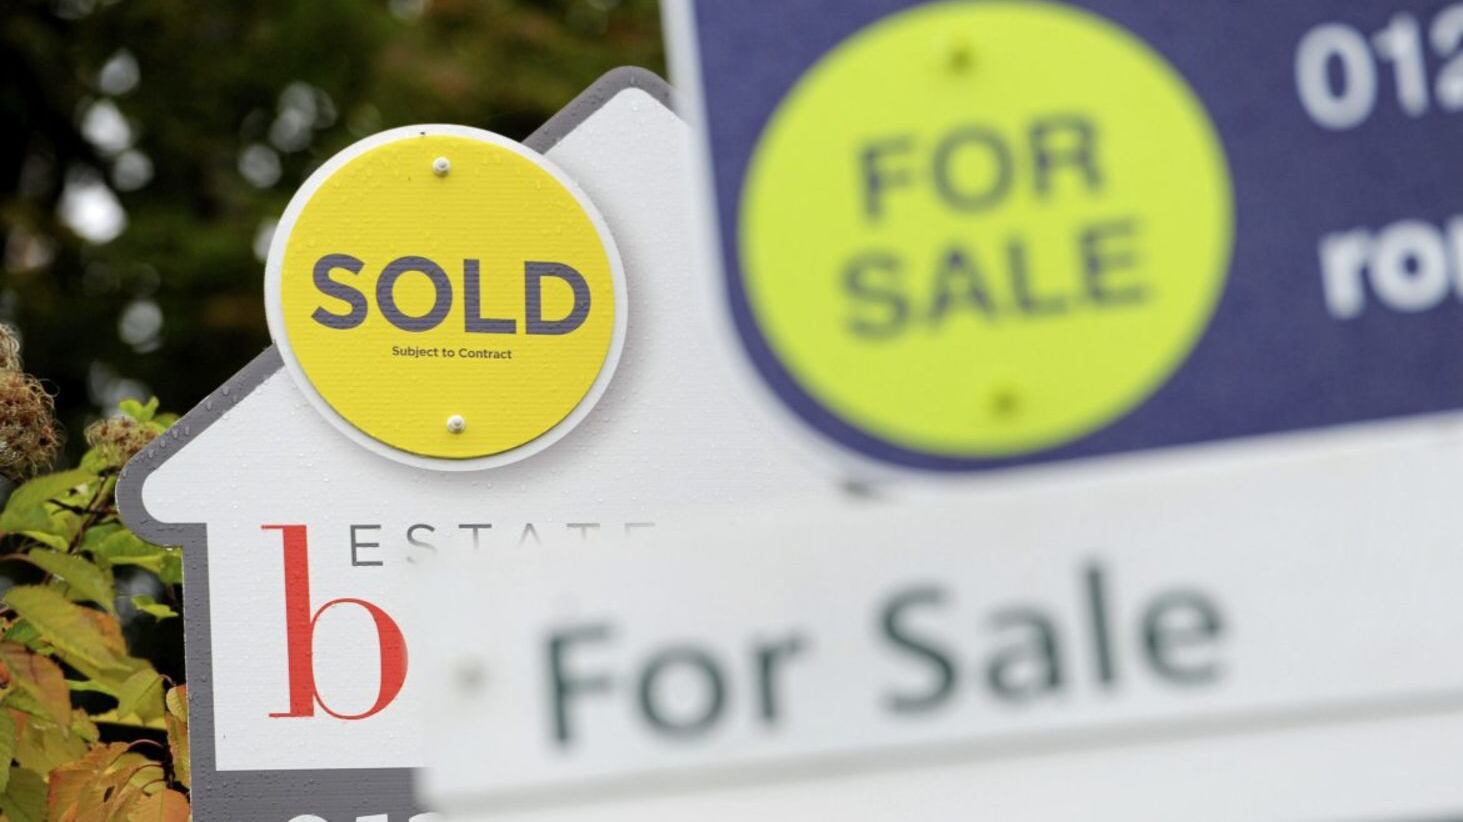 Property values in Northern Ireland increased by just 0.7 per cent in 2016 according to Nationwide 